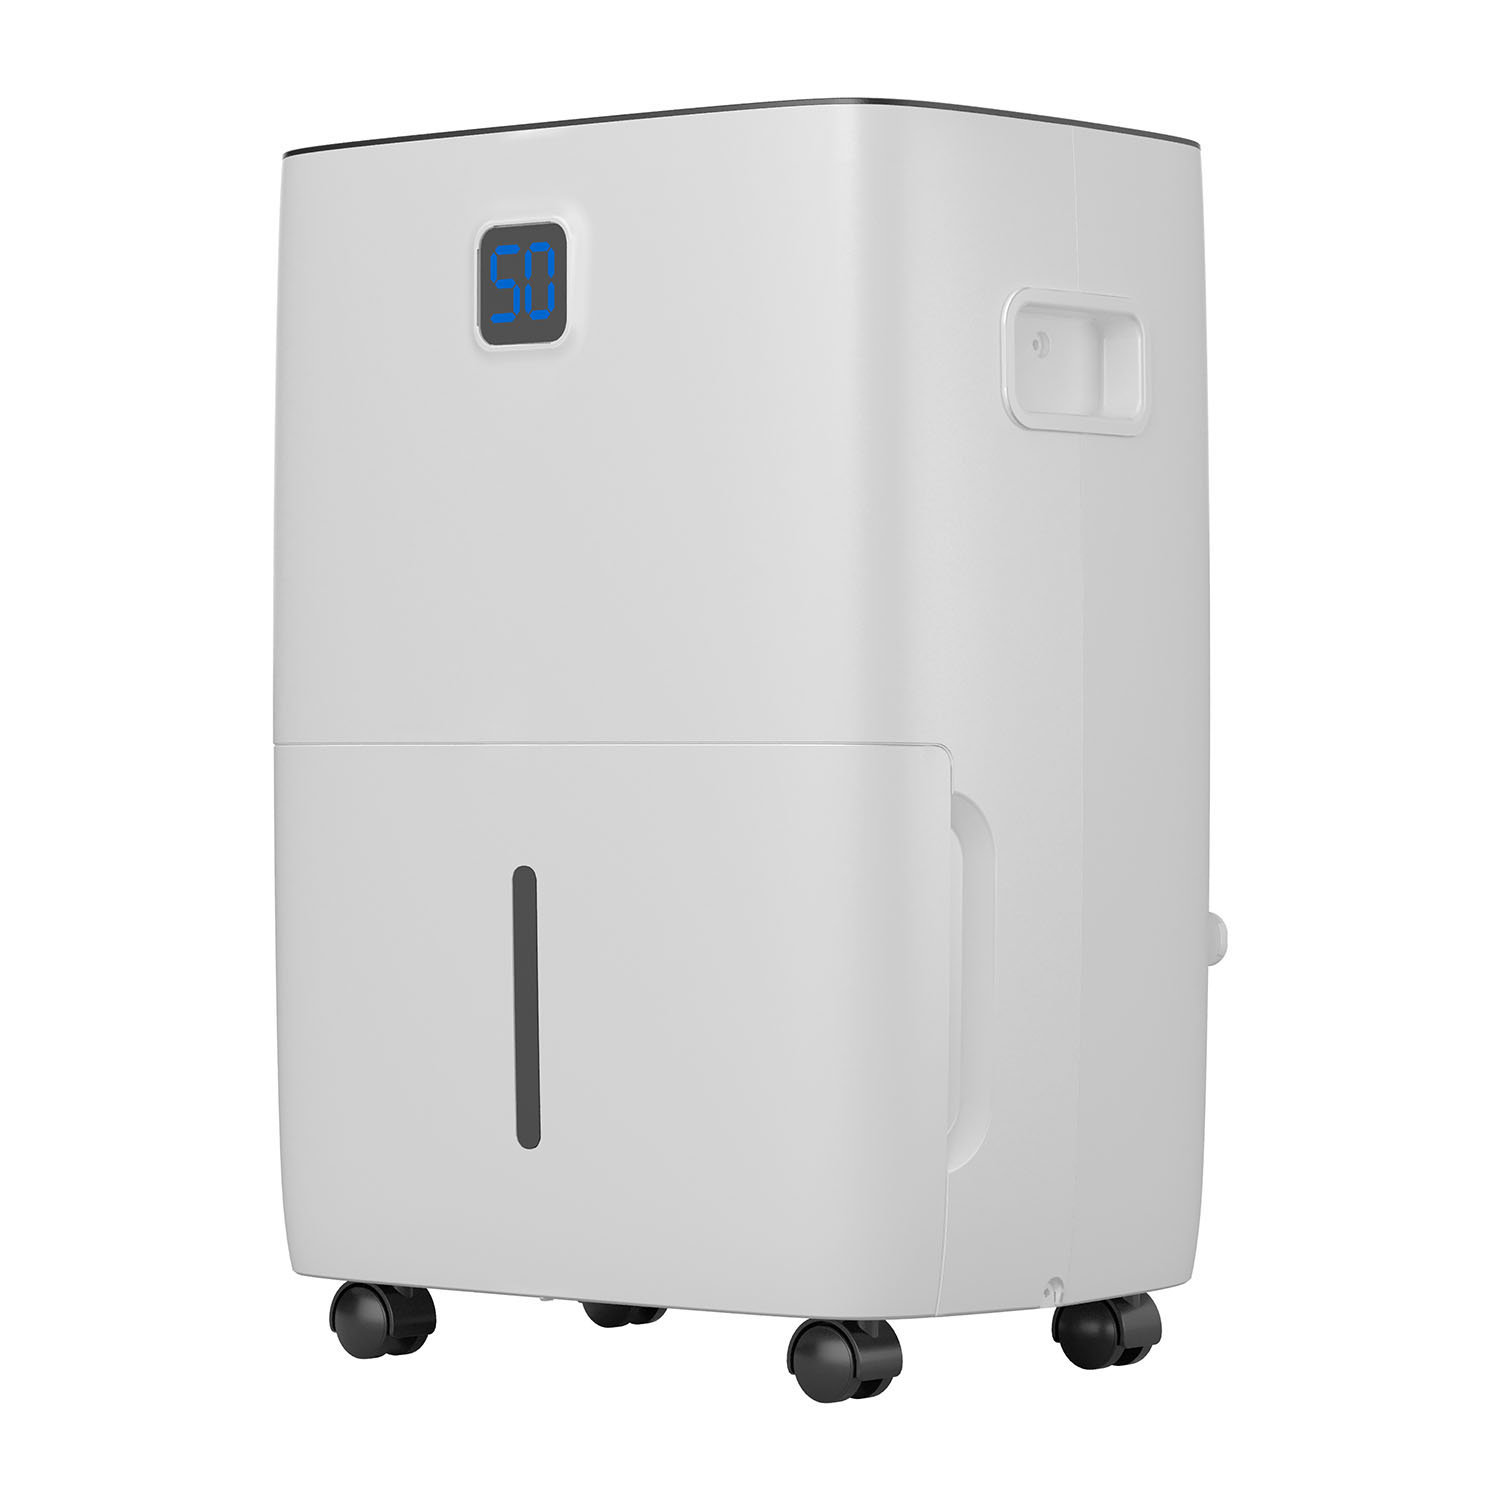 Costway 60-Pint Dehumidifier for Home and Basements 4000 Sq.ft. w